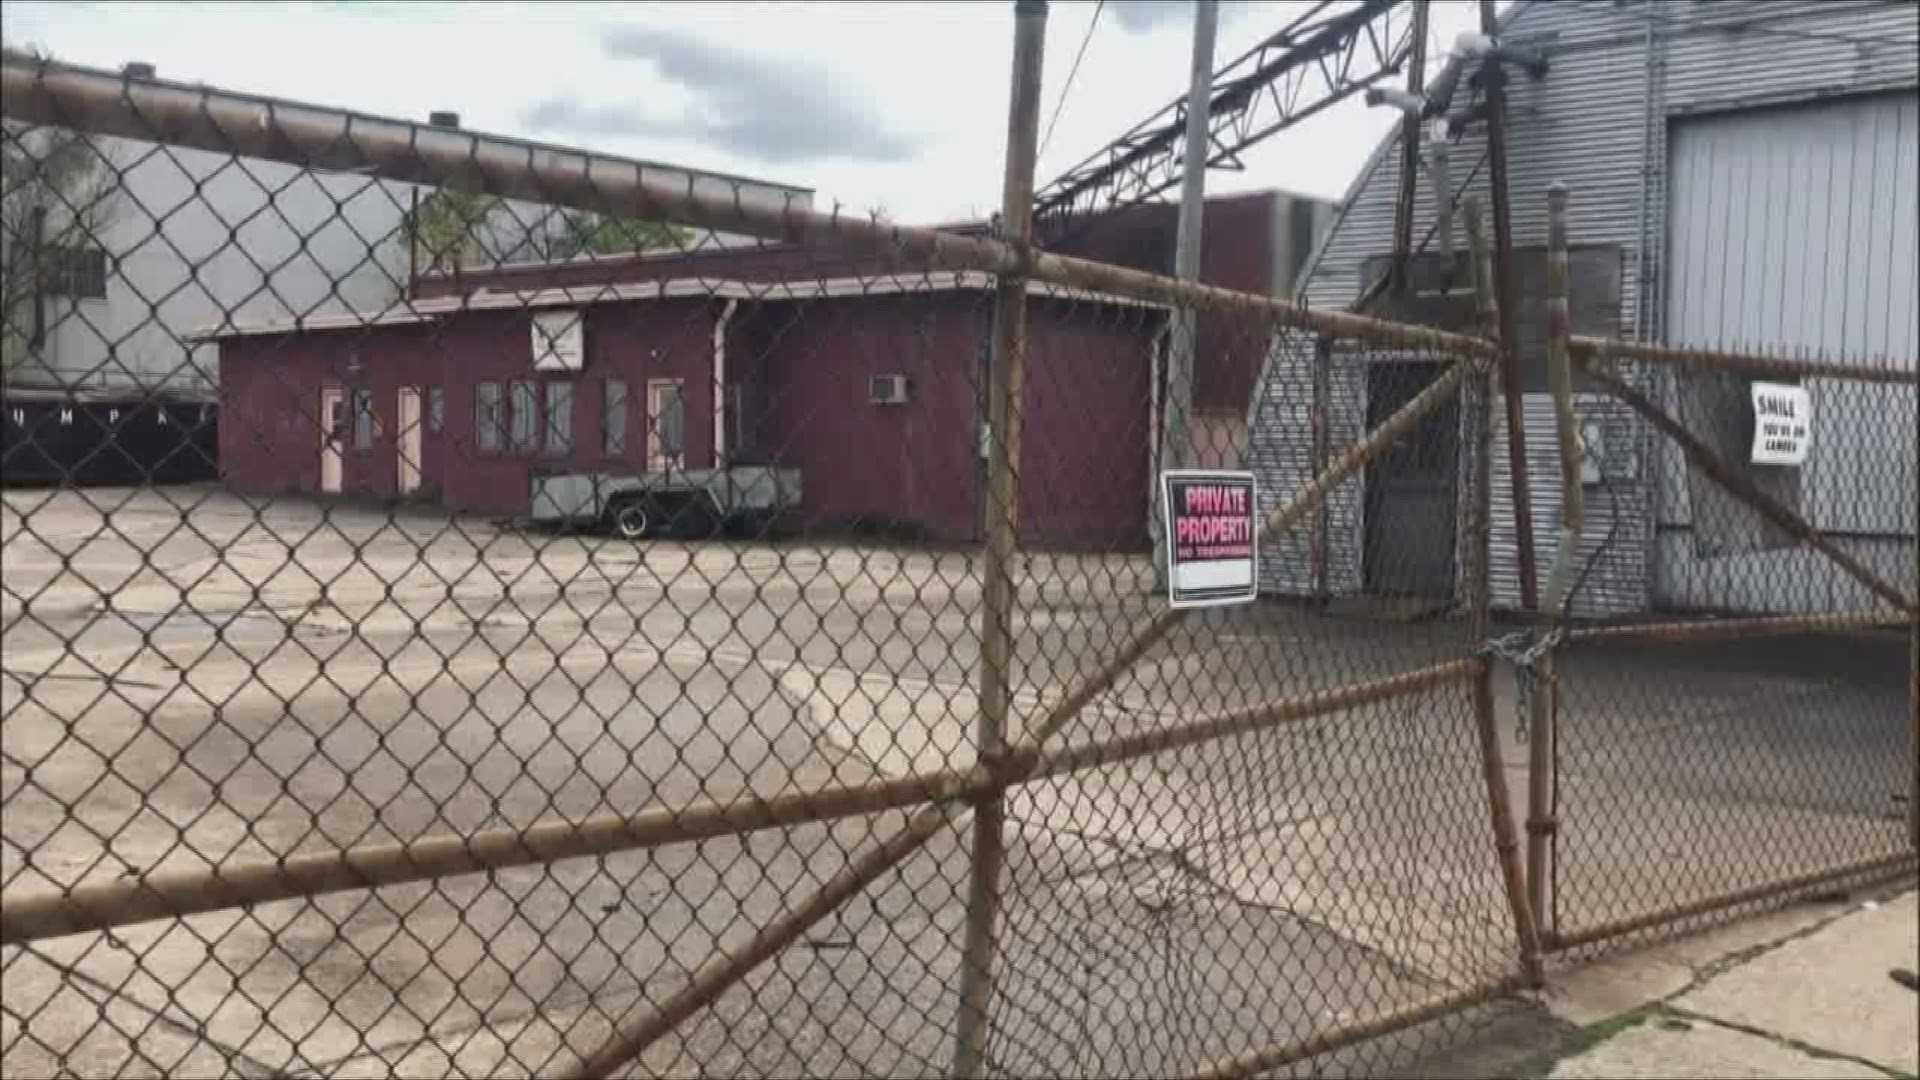 The lack of fresh produce and healthy options in West Louisville is leading a woman to turn an old, vacant building into a grocery store.